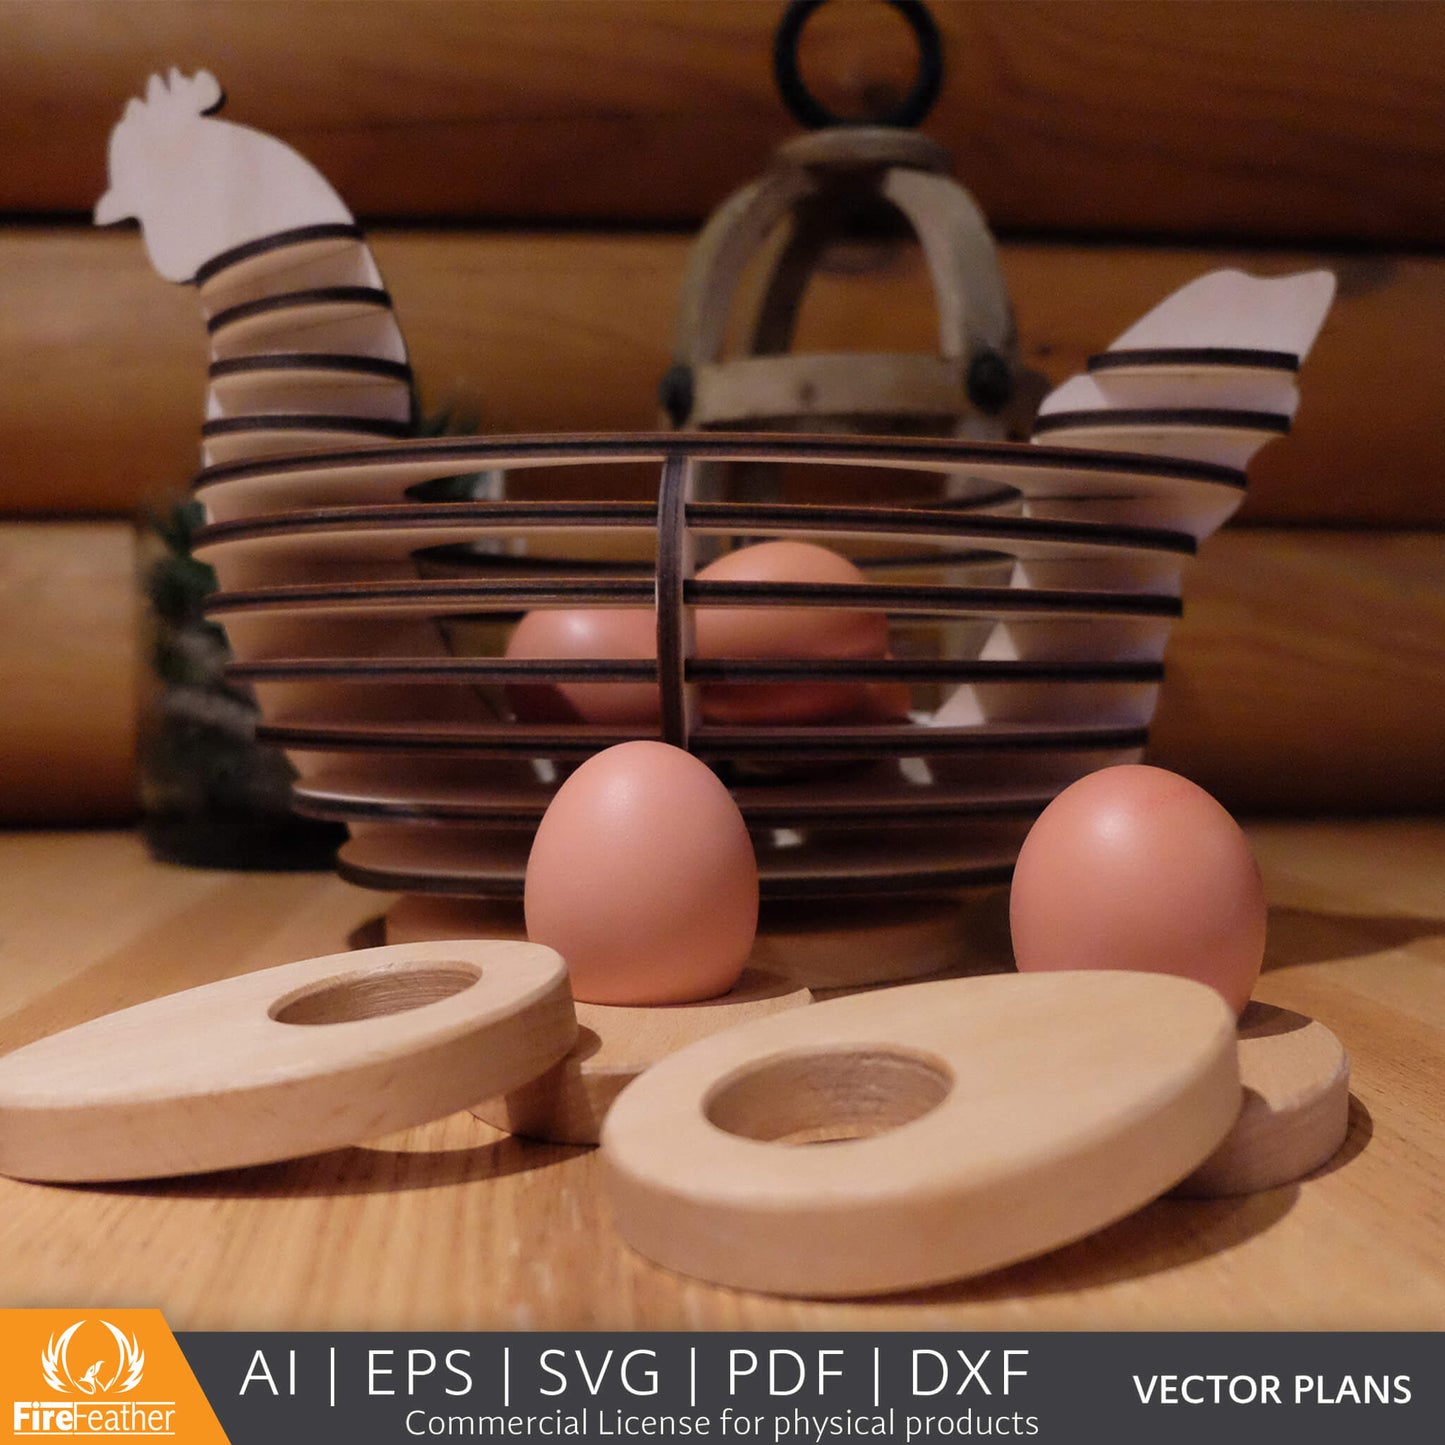 Chicken Egg Basket and Egg-cups DIY vector project file - (Direct Download)